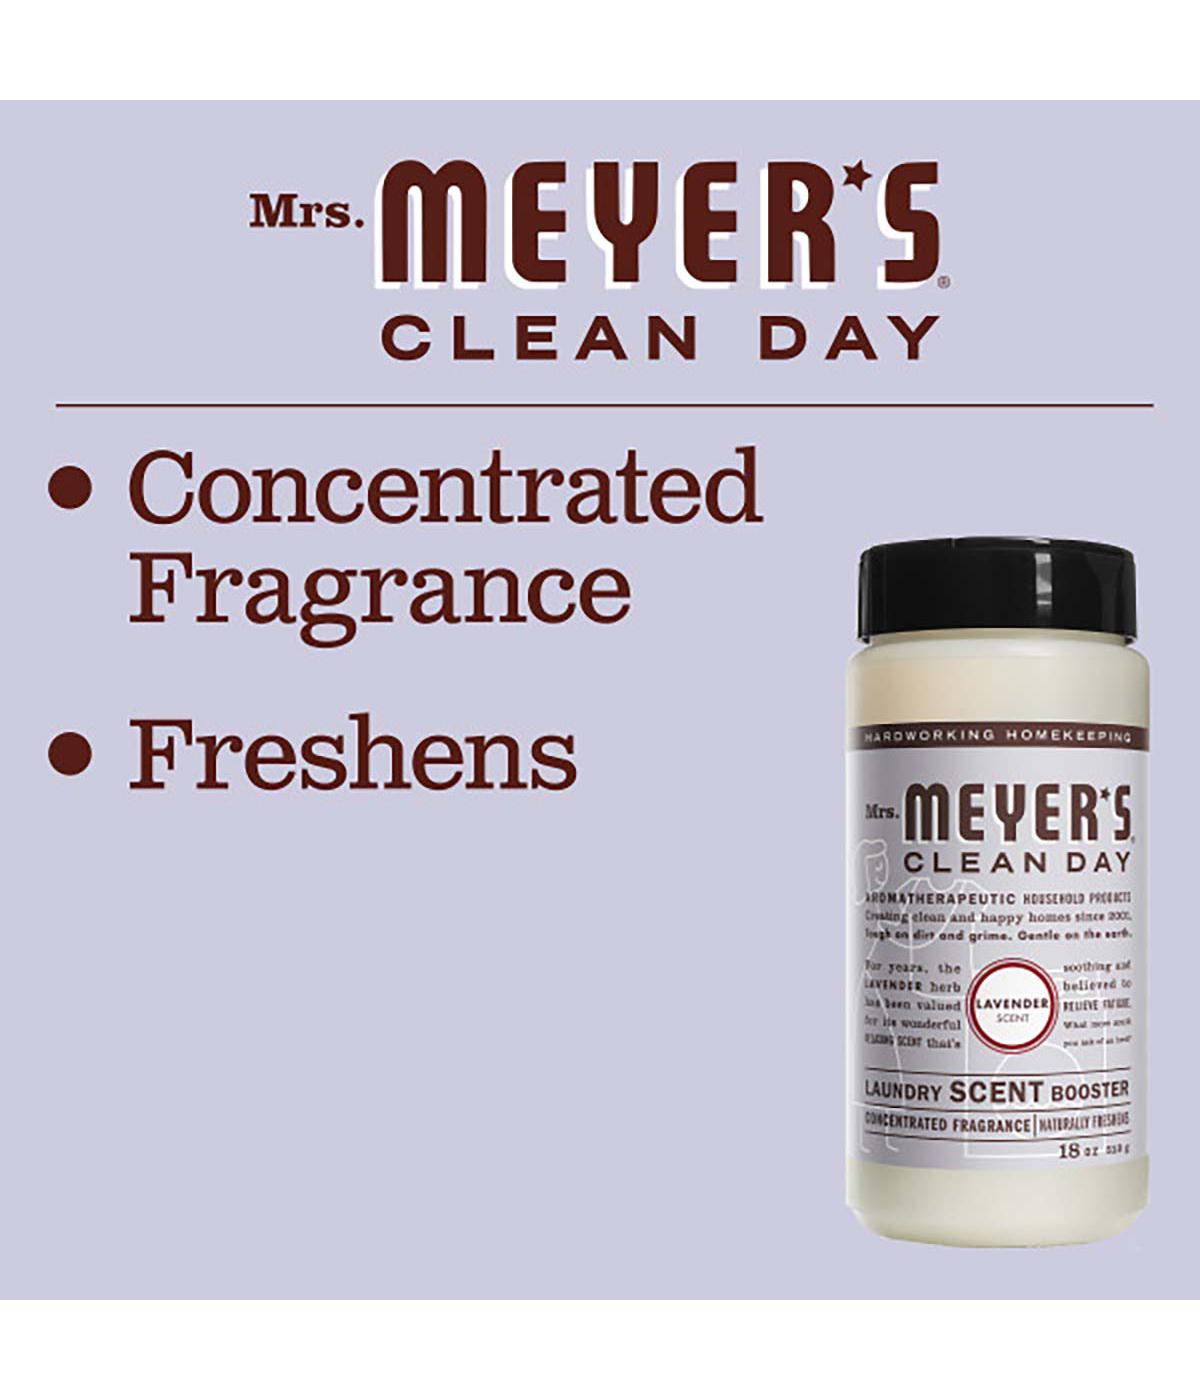 Mrs. Meyer's Clean Day Laundry In-Wash Scent Booster - Lavender; image 4 of 6